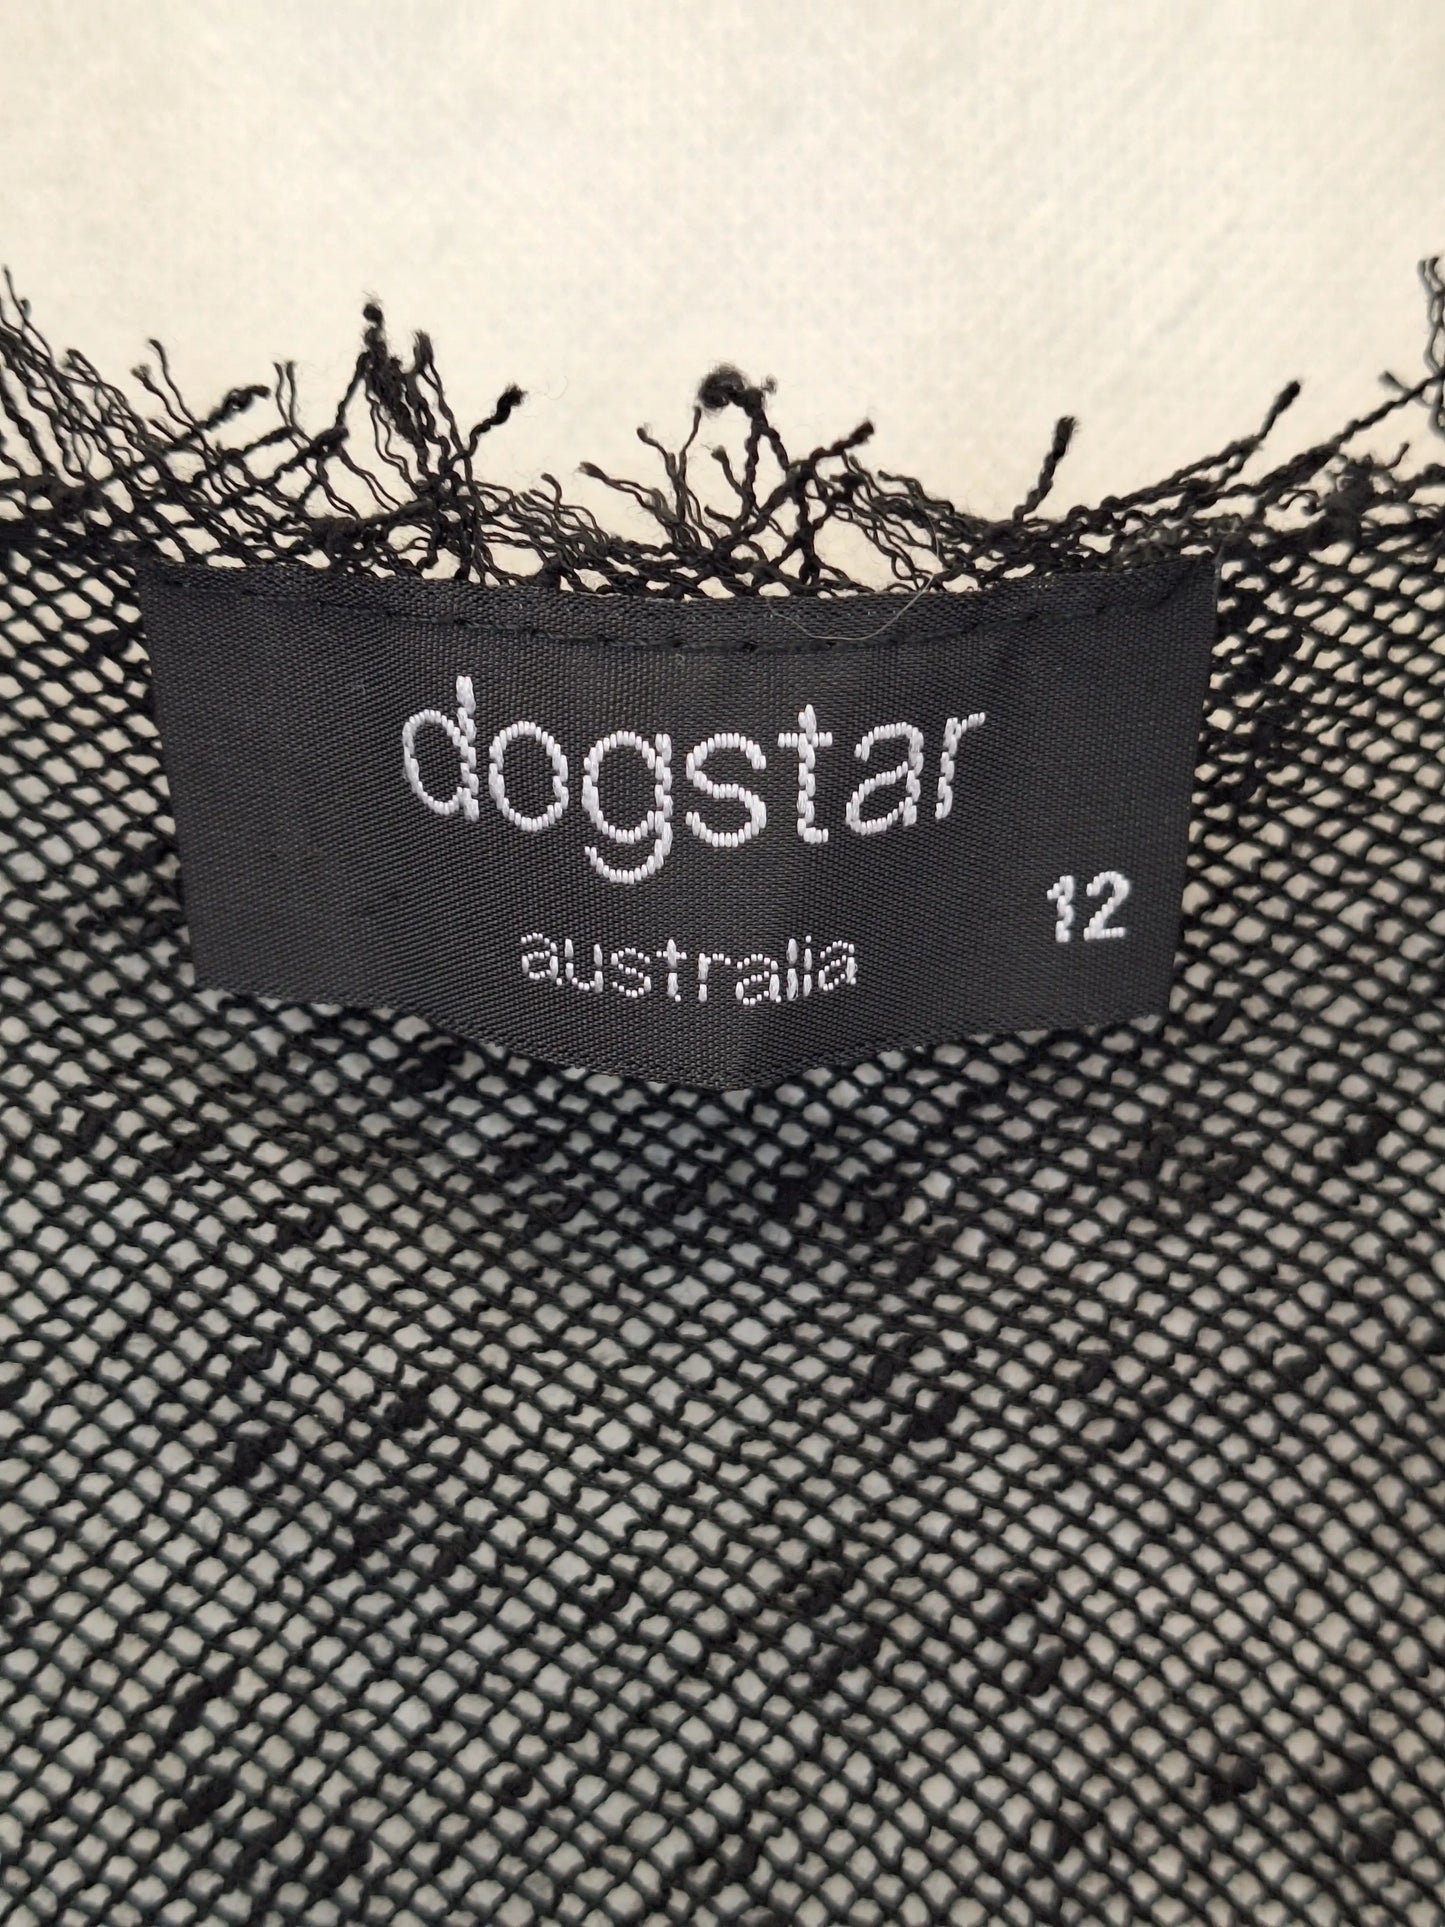 Dogstar Unique Raw Hem Grid Top Size 12 by SwapUp-Online Second Hand Store-Online Thrift Store